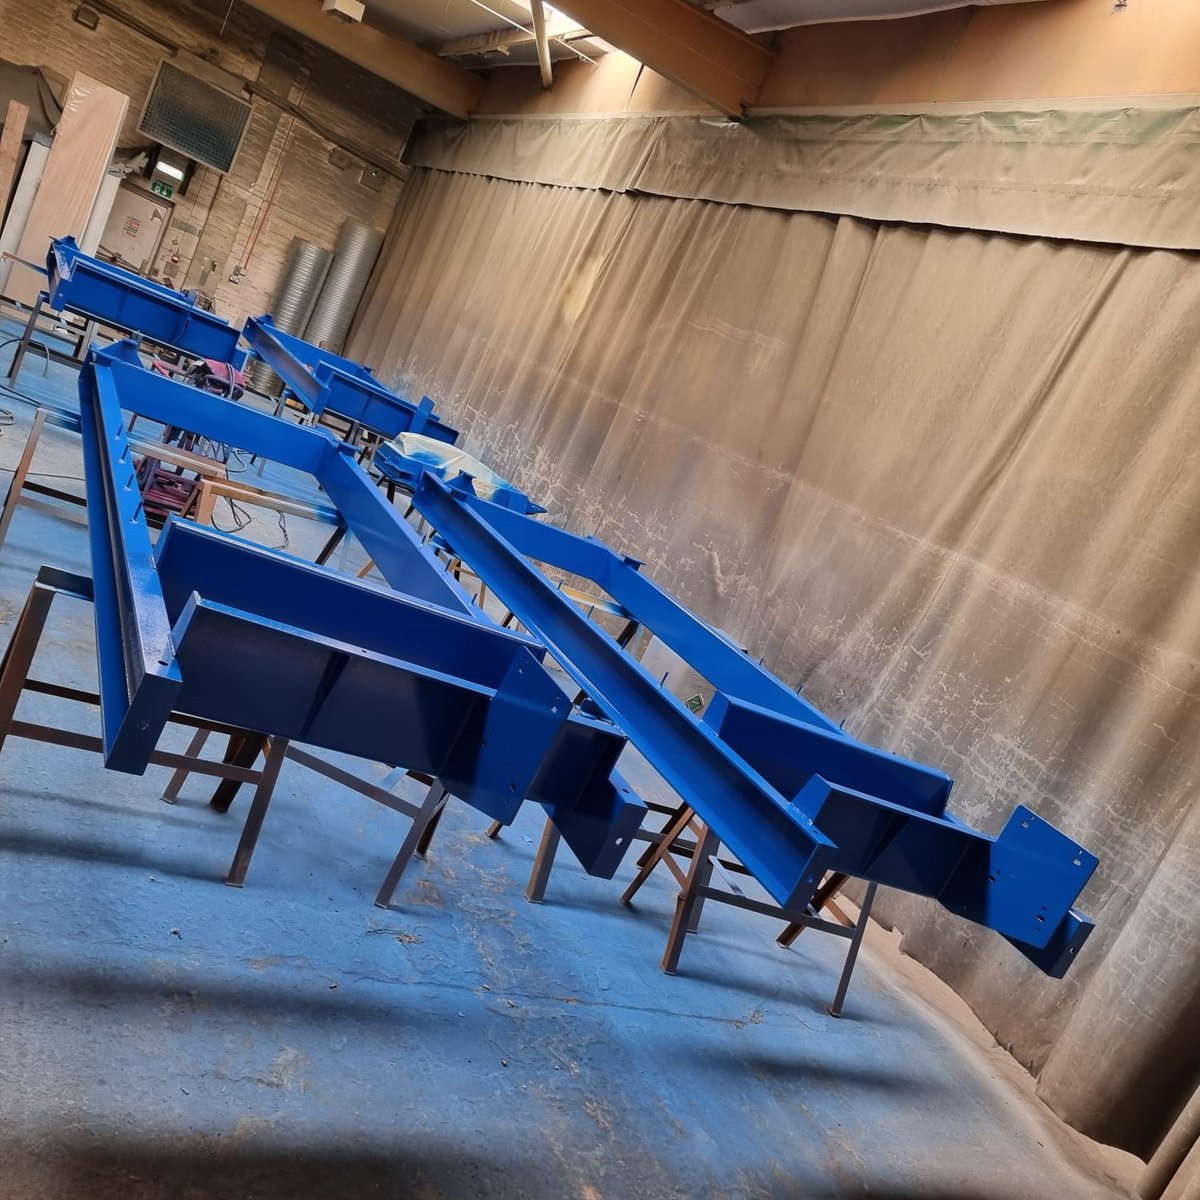 SHOT BLASTING, #NORTHWEST

#Screening machine frames shot blasted and painted to C4 environment coating system.

Contact us with your project.

#agriculture #pharmaceutical #foodindustry #plastics #recycling #mineralprocessing
#Preston #Lancashire

centurionblastcleaning.co.uk/Services/Shot_…